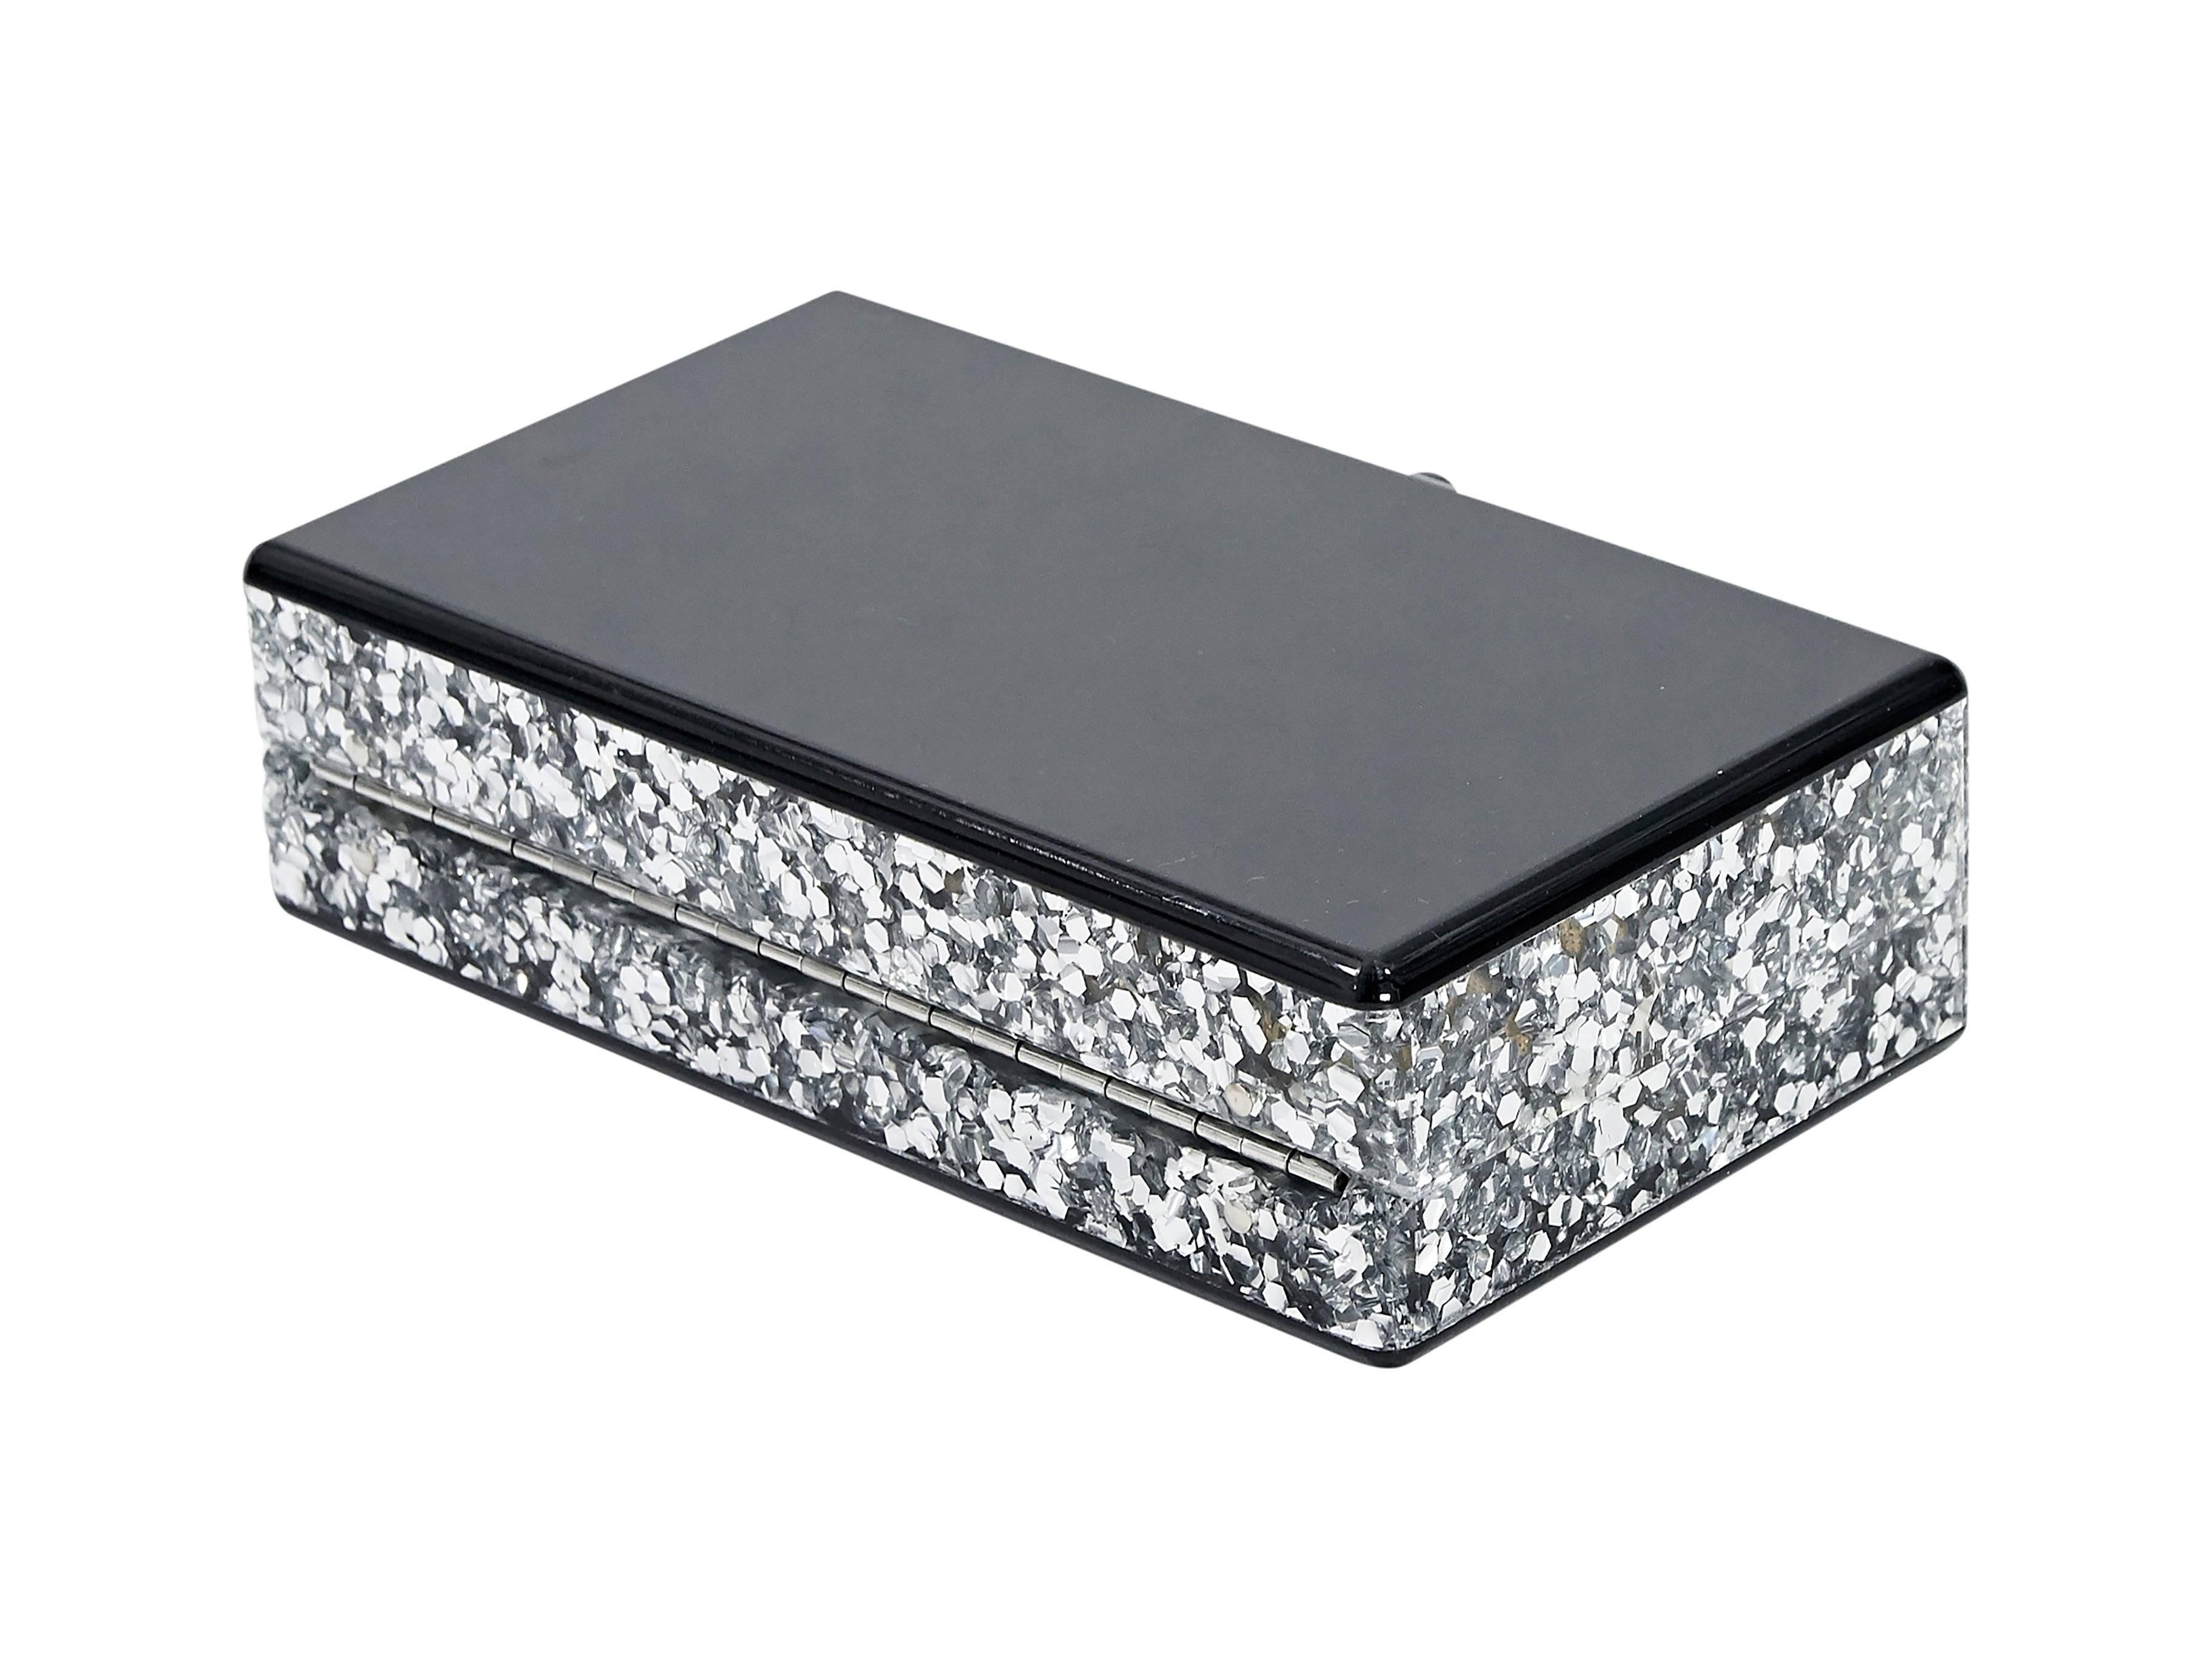 Product details:  Black acrylic box clutch by Edie Parker.  Silver glittered sides.  Top flip-lock closure.  Inner mirror.  6.75